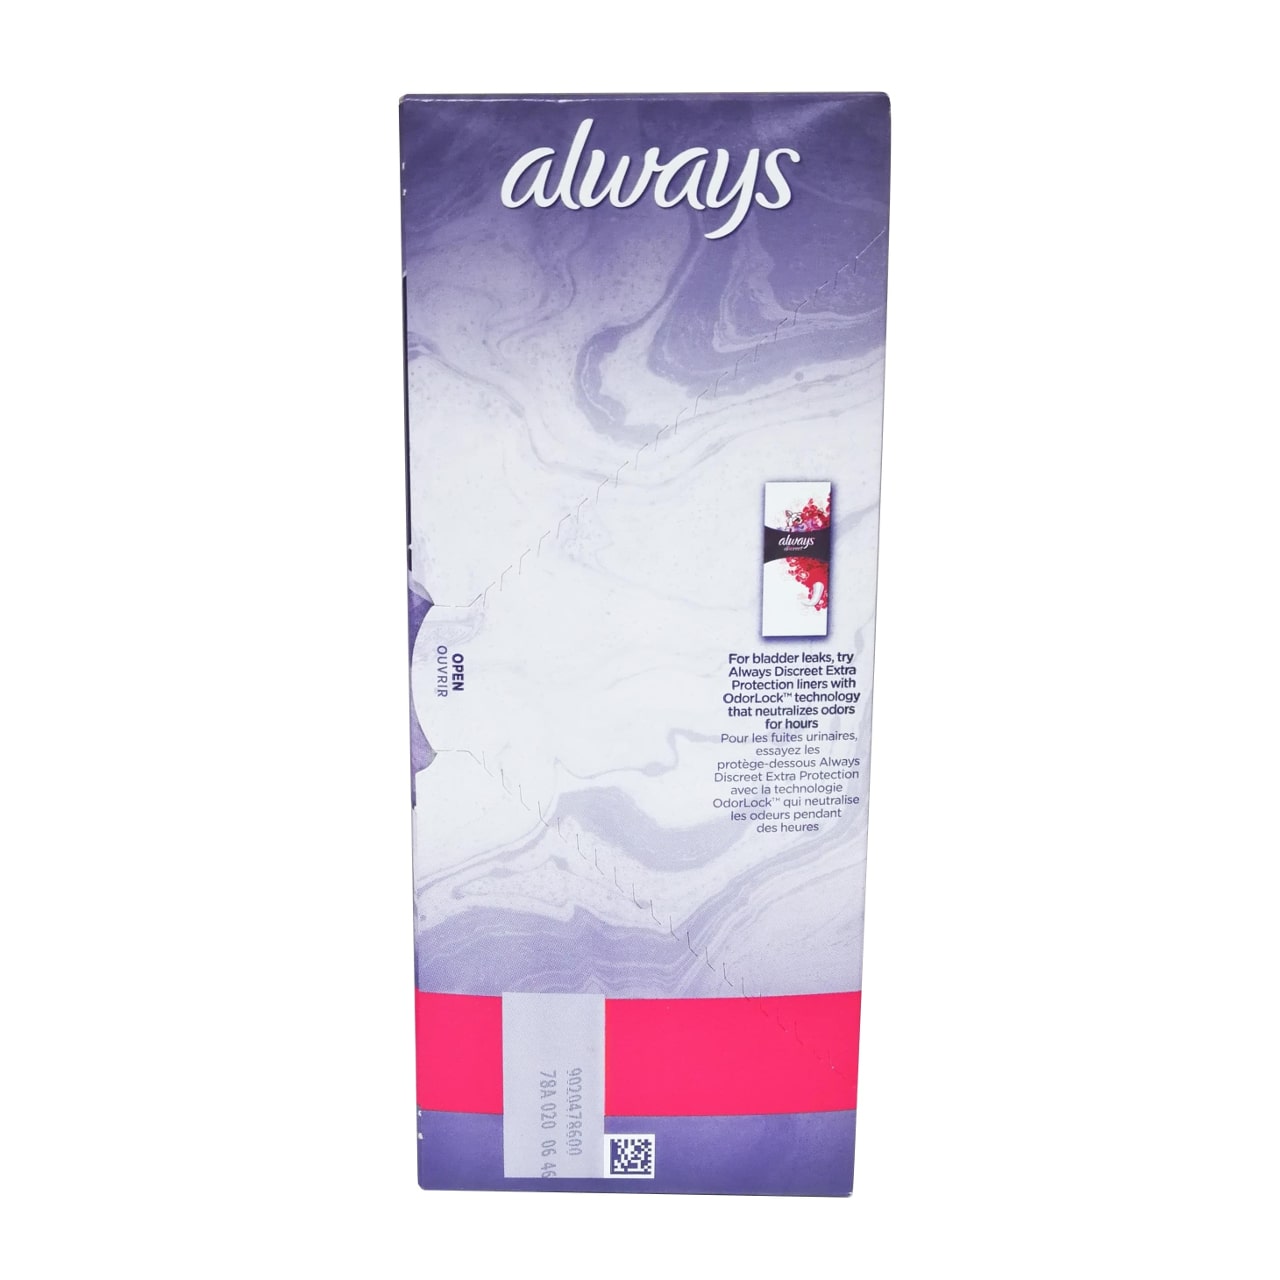 Product details for Always Daily Liners Xtra Protection Extra Long 2 of 3